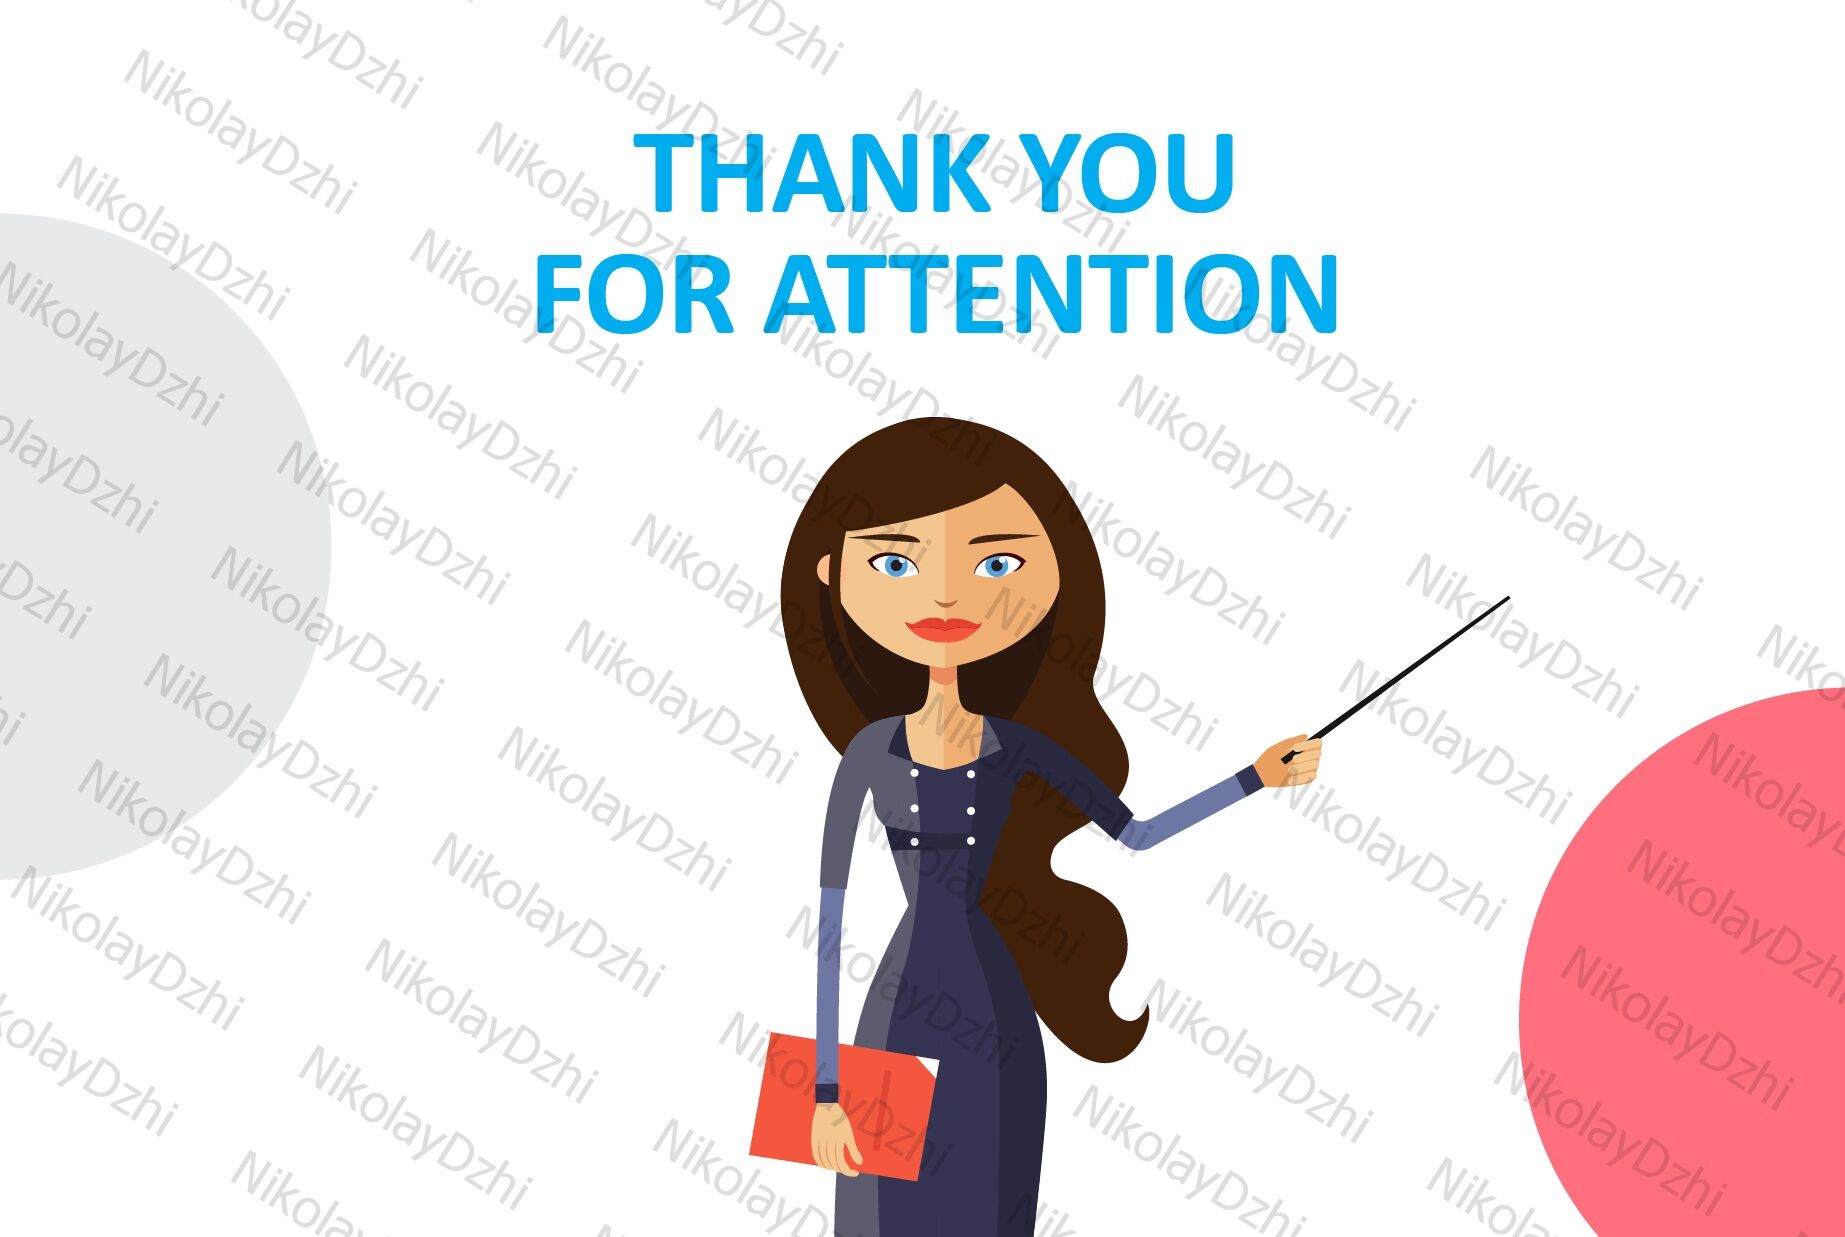 thank you for your attention cartoon